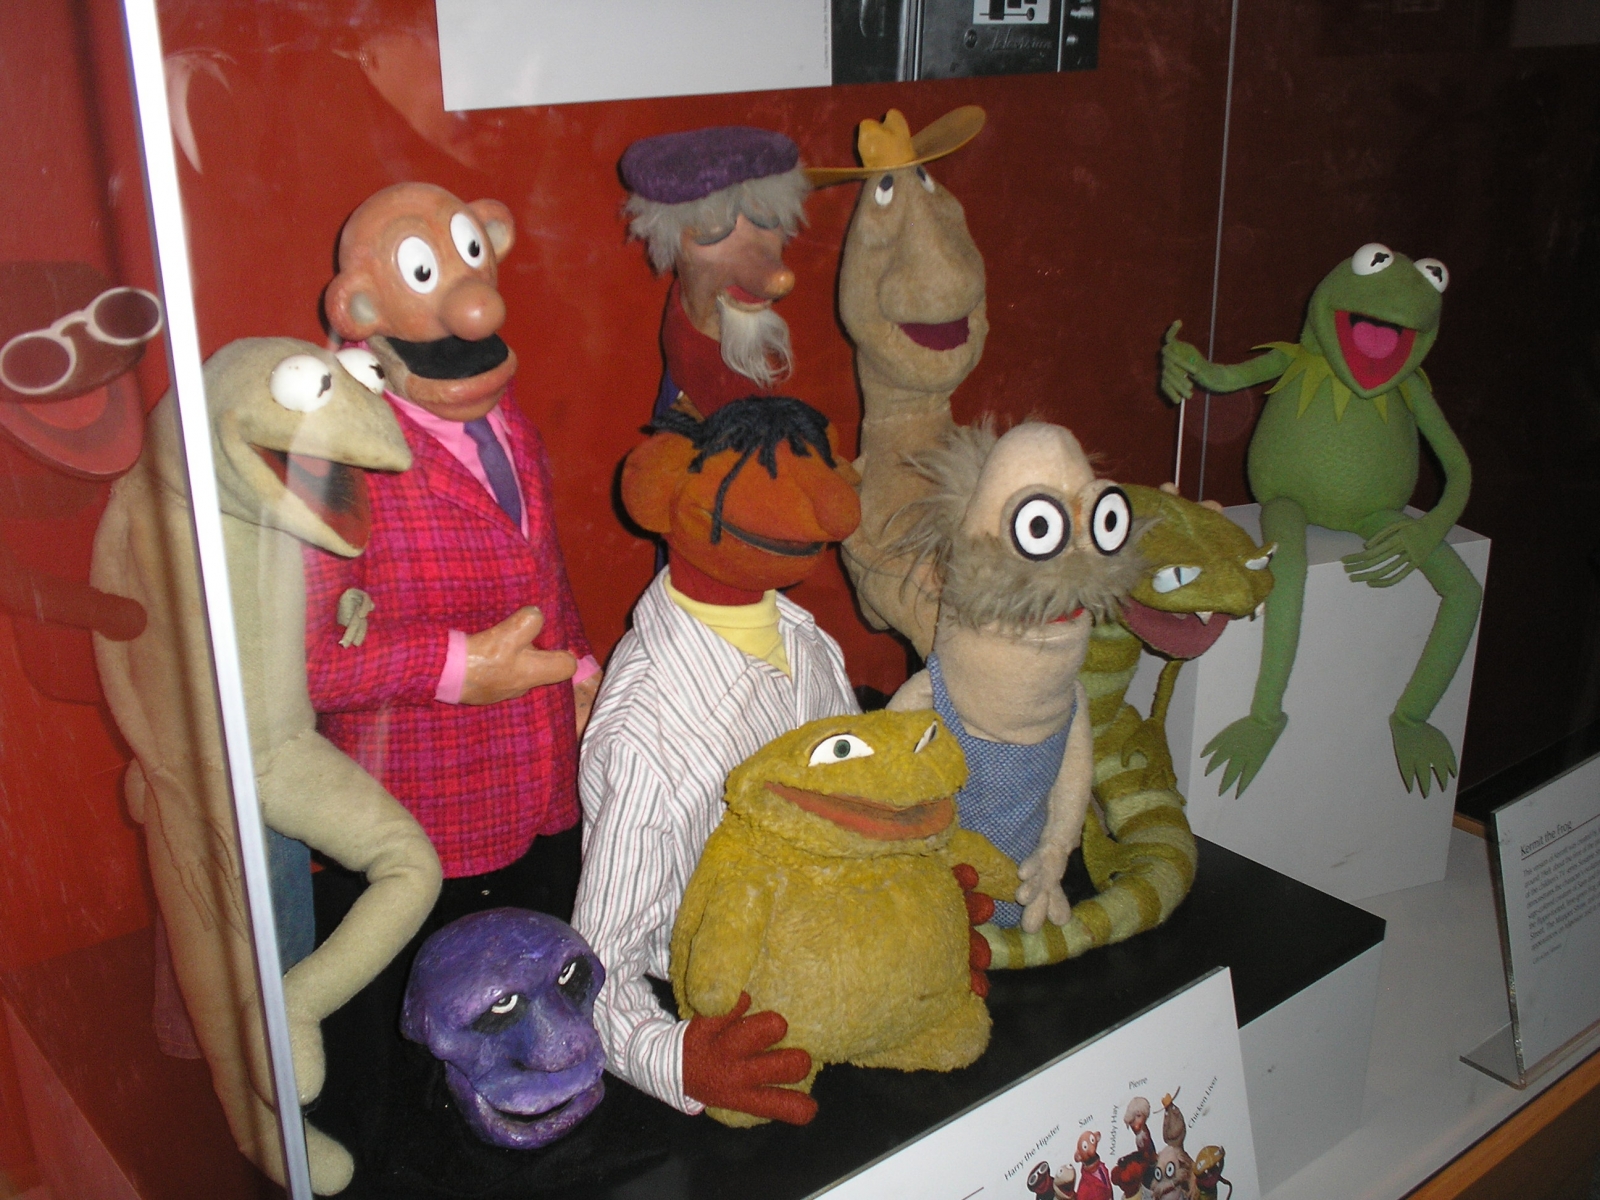 2 Kermits and some other puppets I don't know.